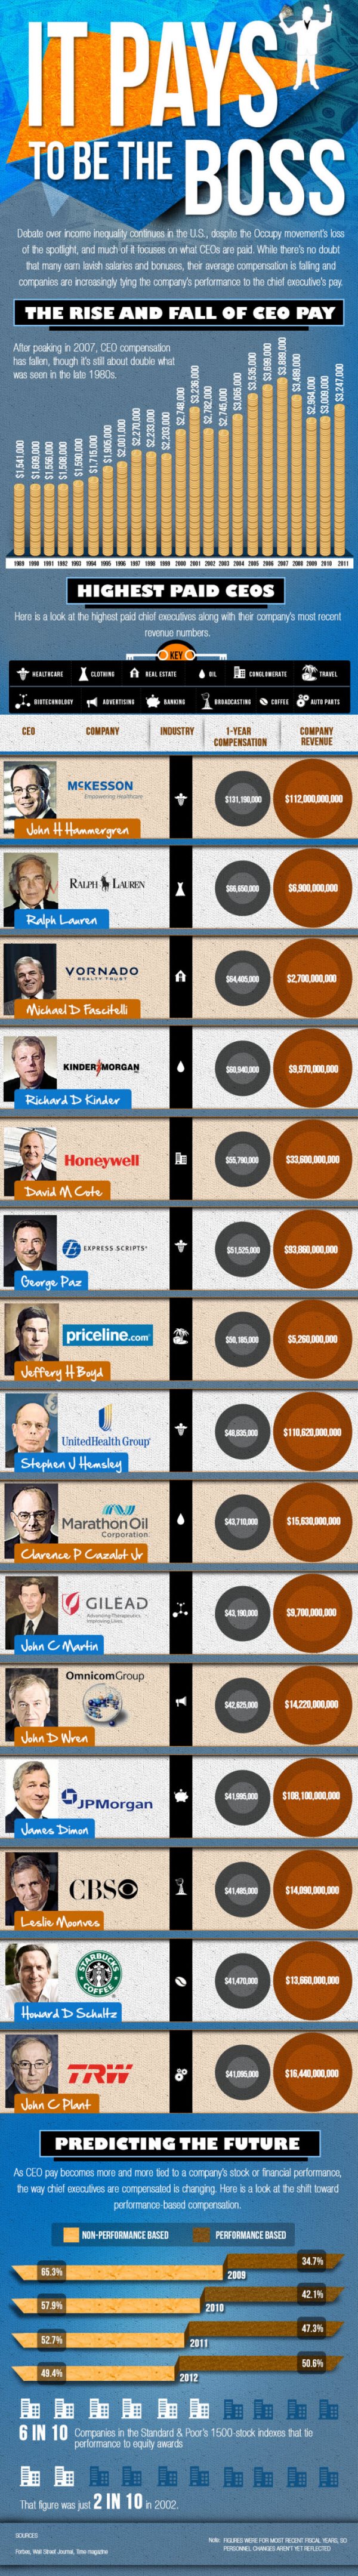 15 Highest Paid CEOs Infographic